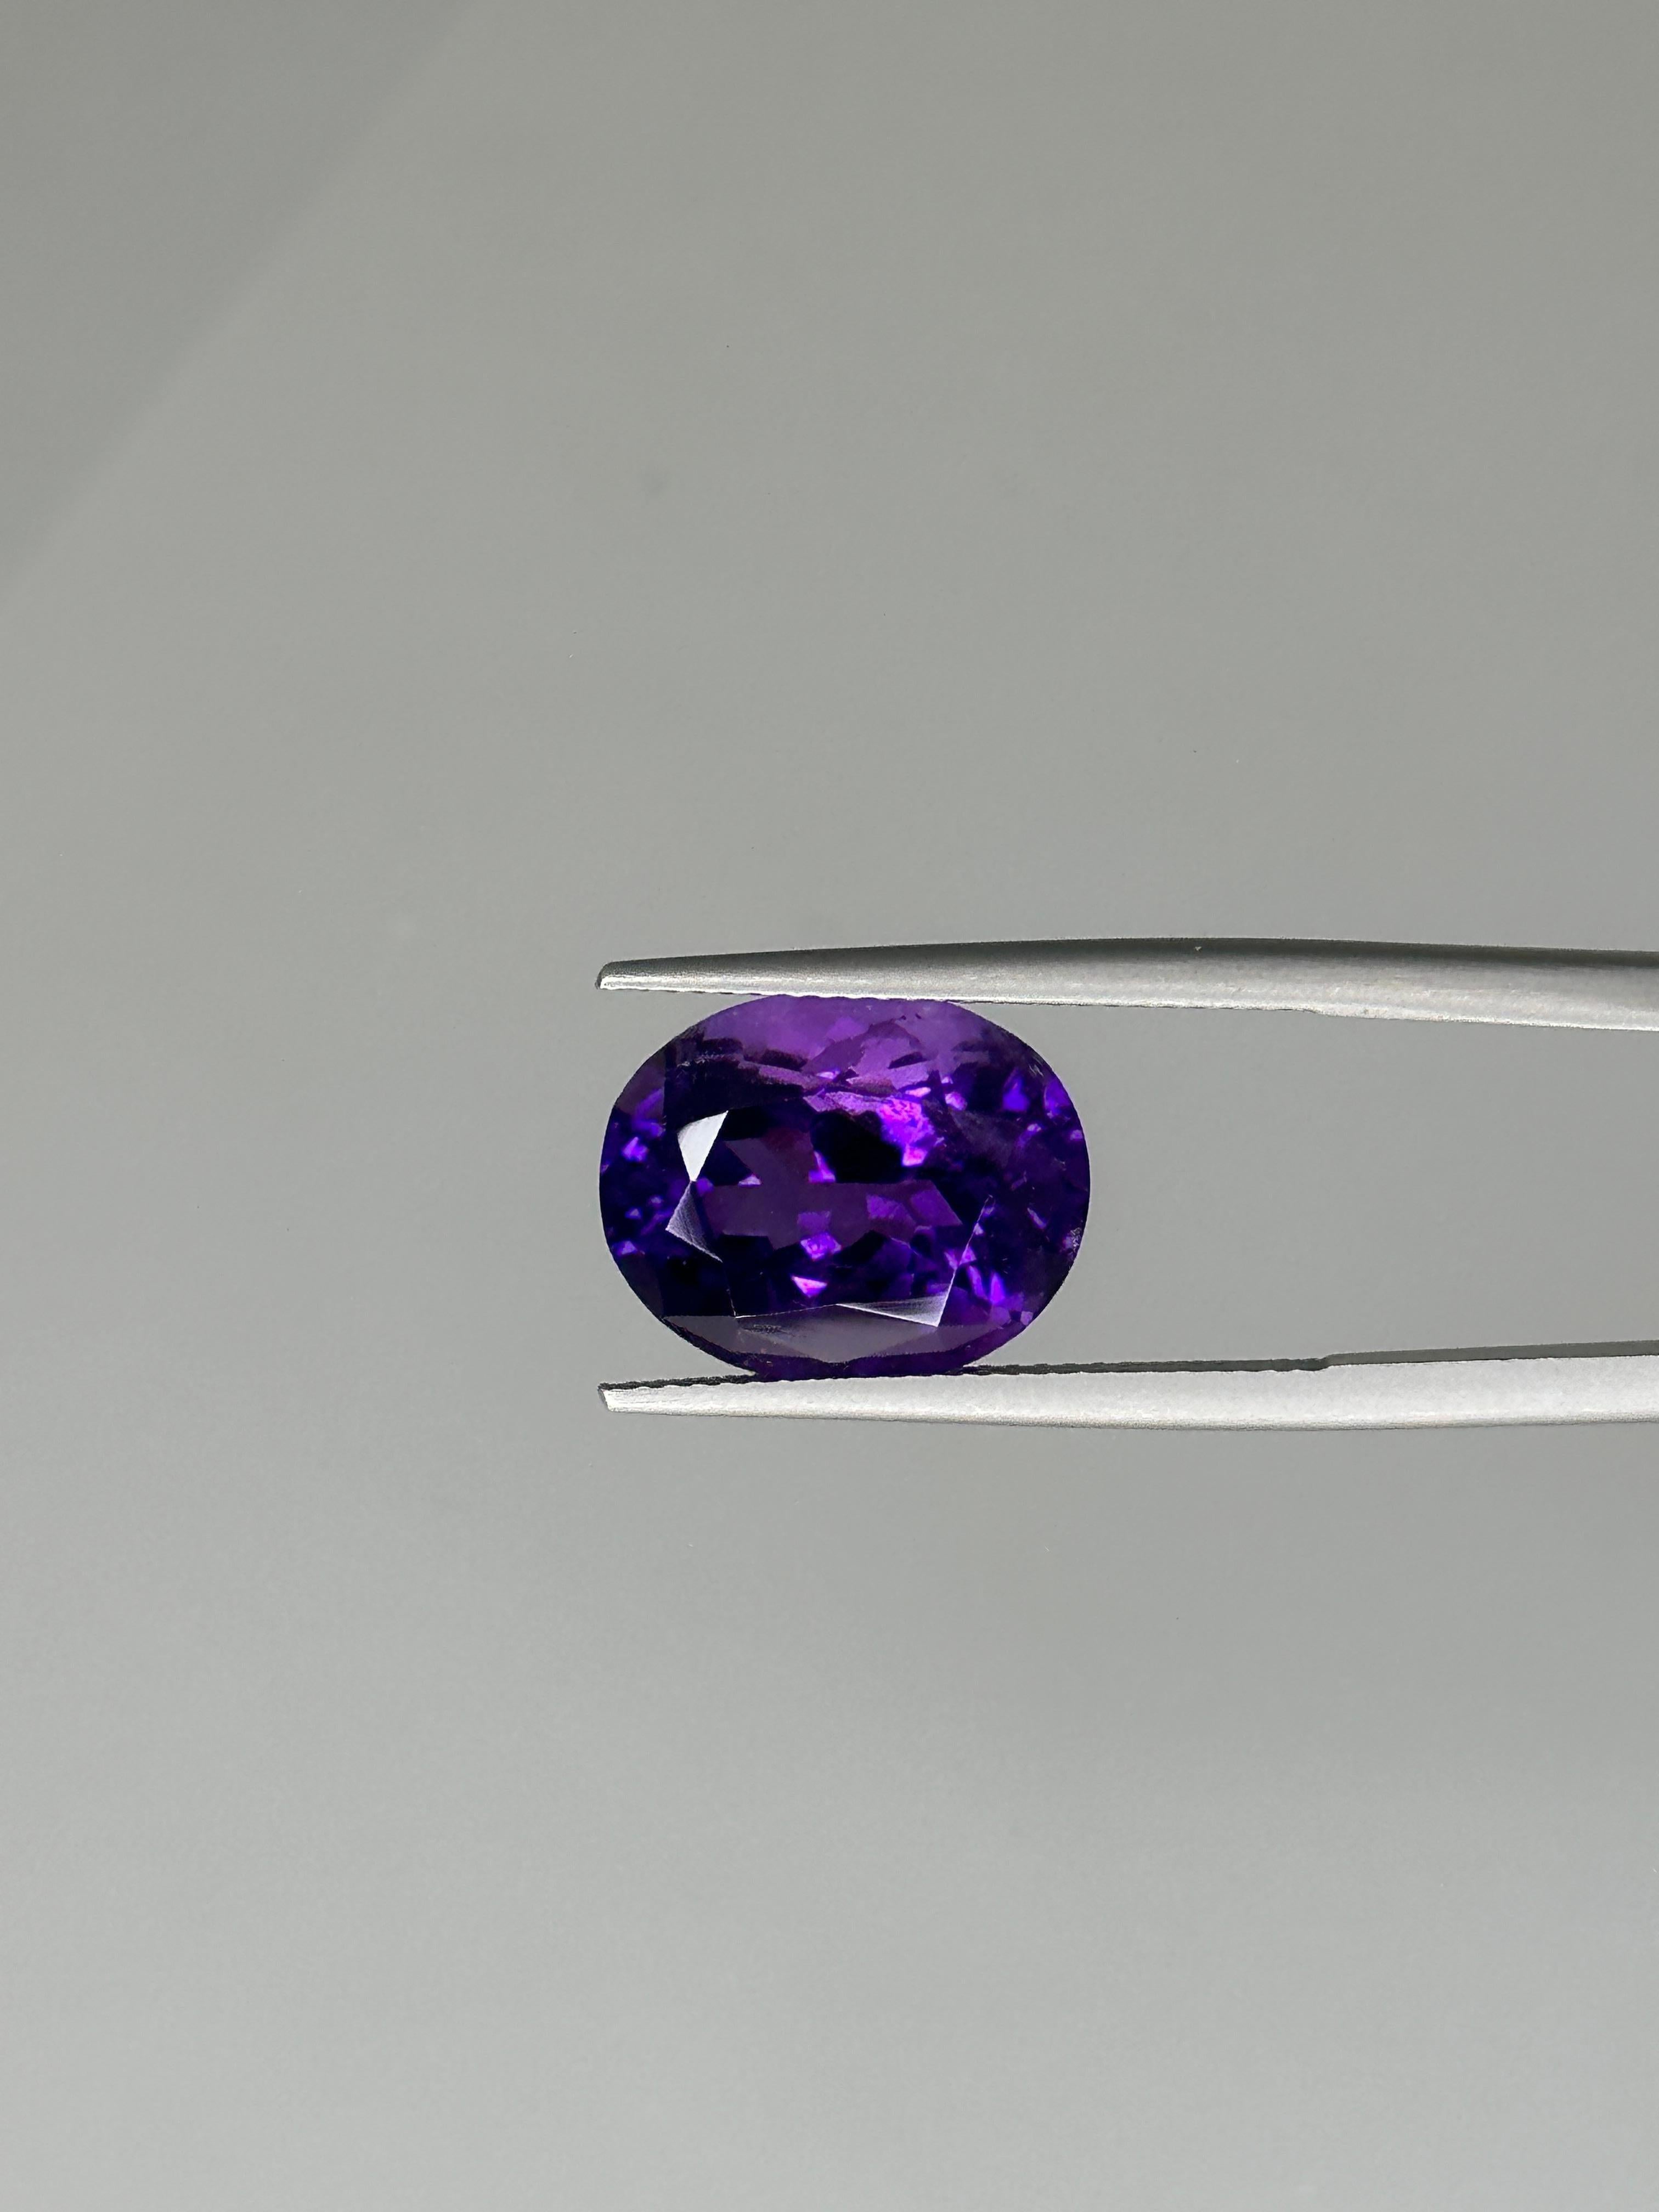 Wonderful Amethyst. Classic Zambian material. Imbued with a superb color.

7.28 carat Oval Deep Purple Amethyst
Shape: Oval
Crown: Modified Brilliant
Pavilion: Modified Brilliant
Dimensions: 14.20 x 11.43 x 8.40 mm
Color: Deep Purple
Weight: 7.28